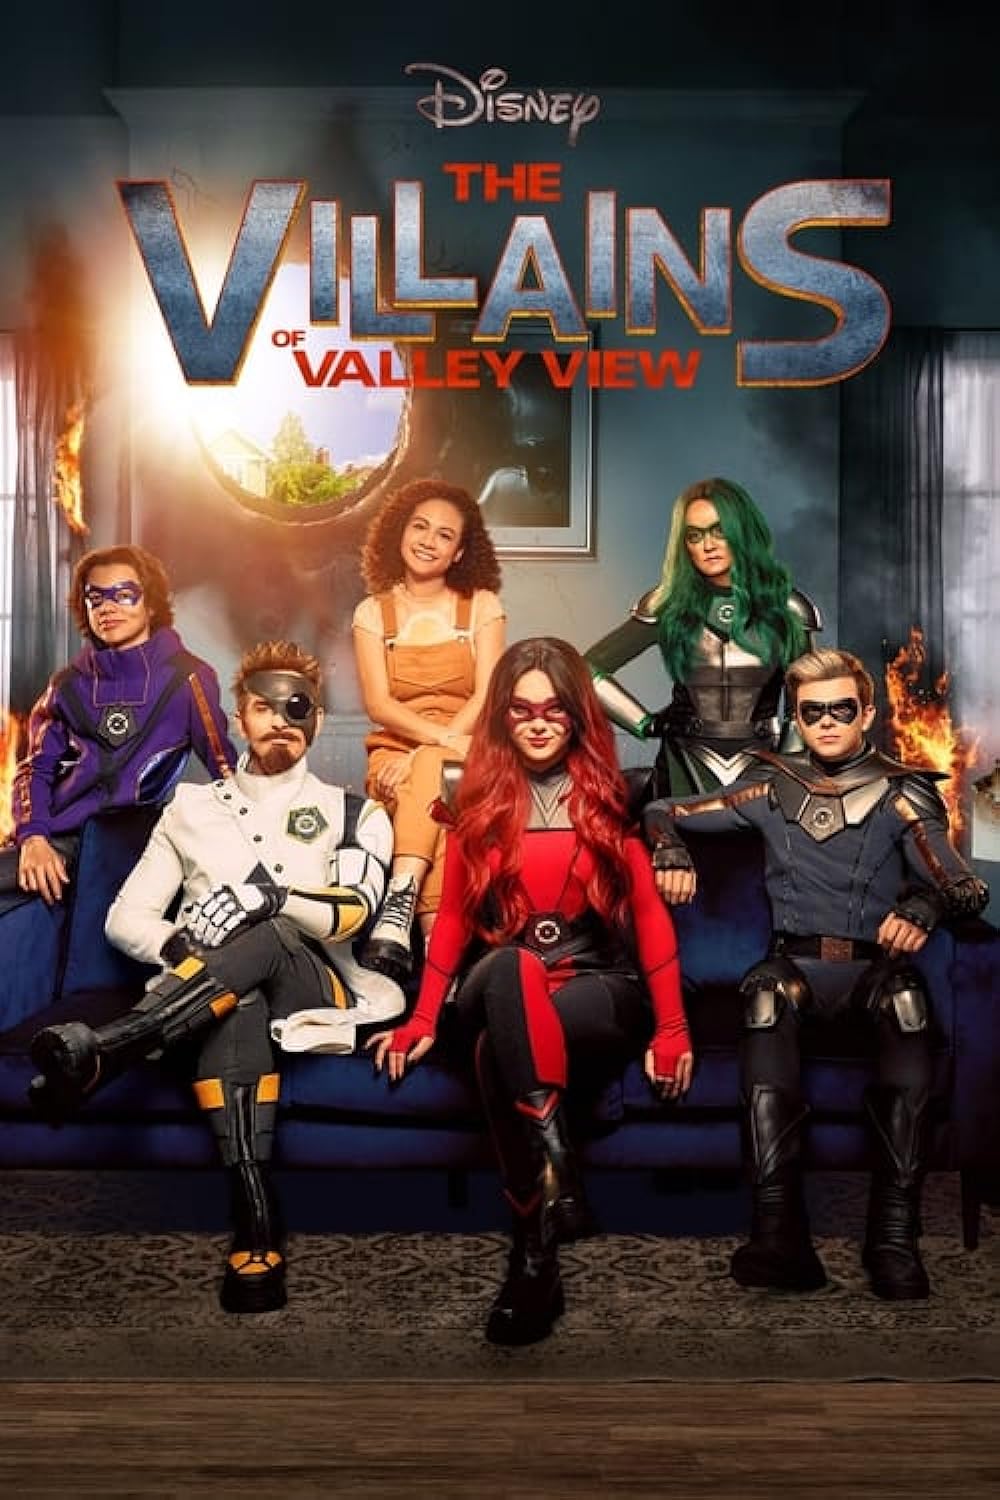 Villains of Valley View